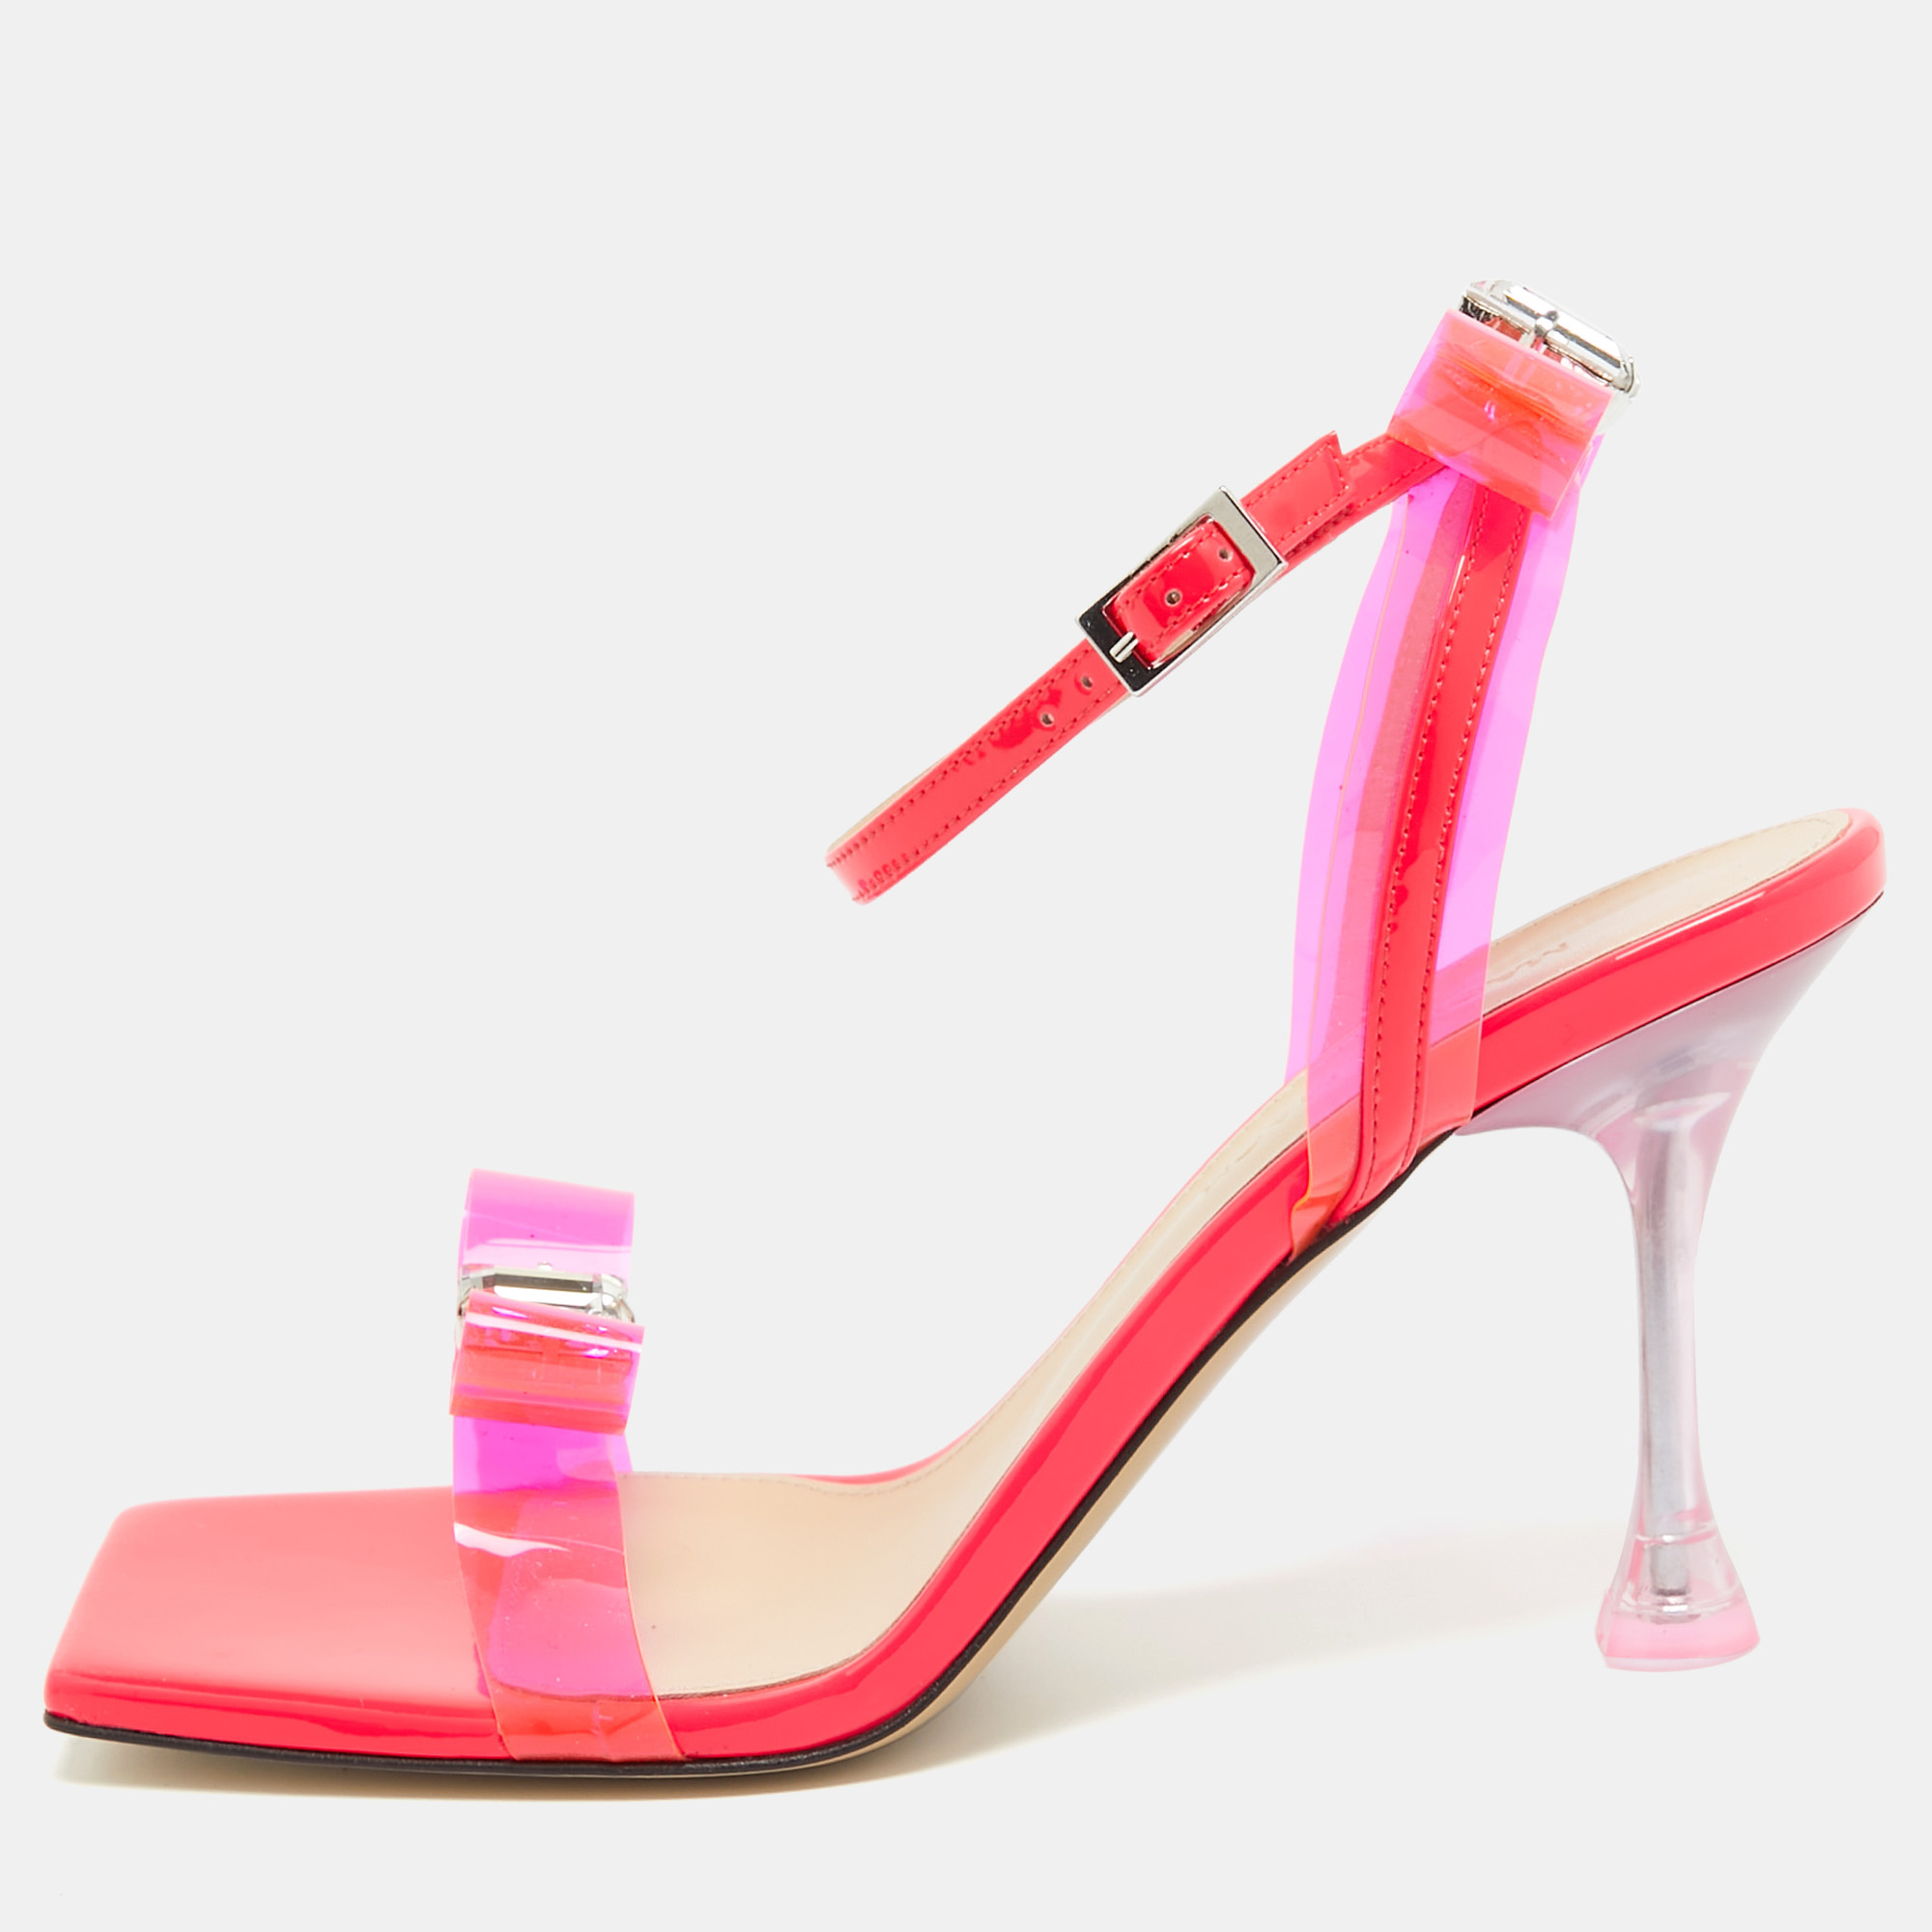 Mach & mach neon pink pvc and patent leather french bow sandals size 36